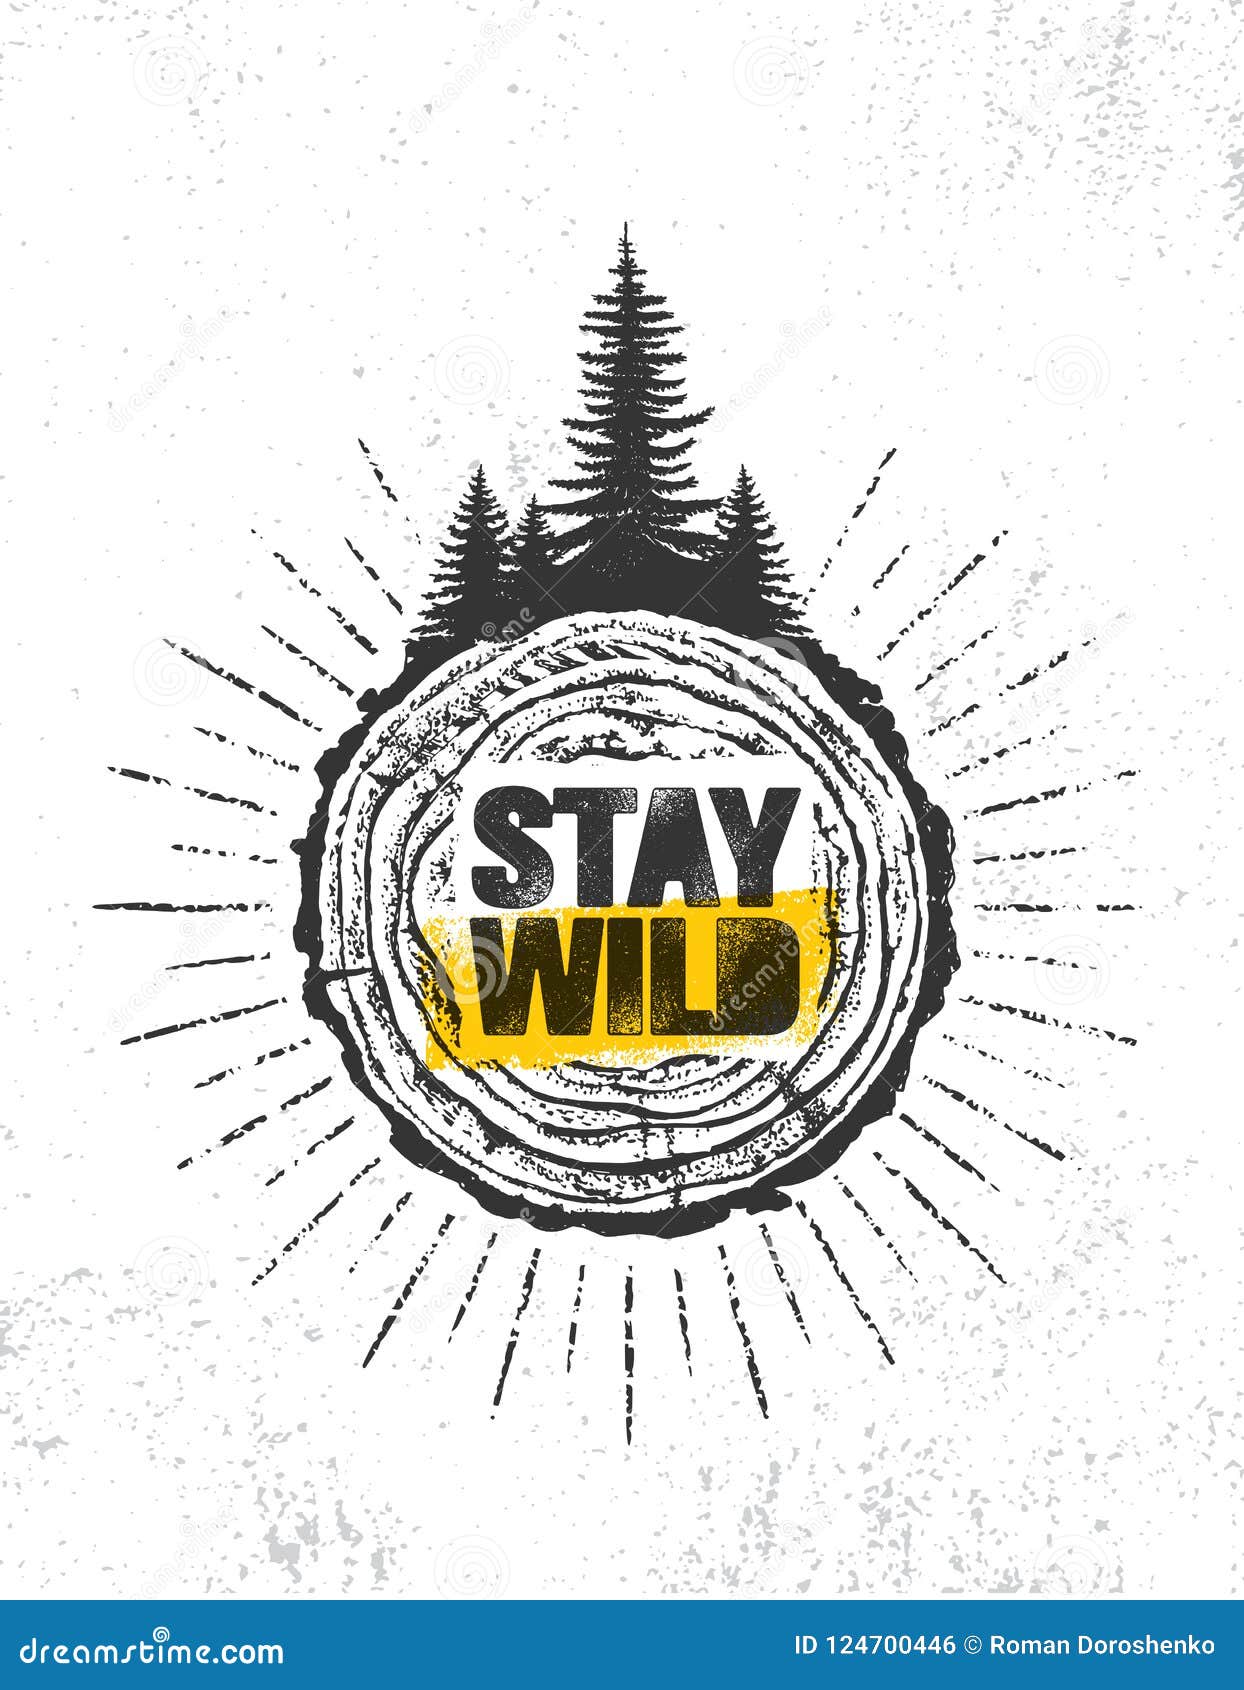 stay wild. outdoor adventure mountain hike creative motivation quote banner concept.  